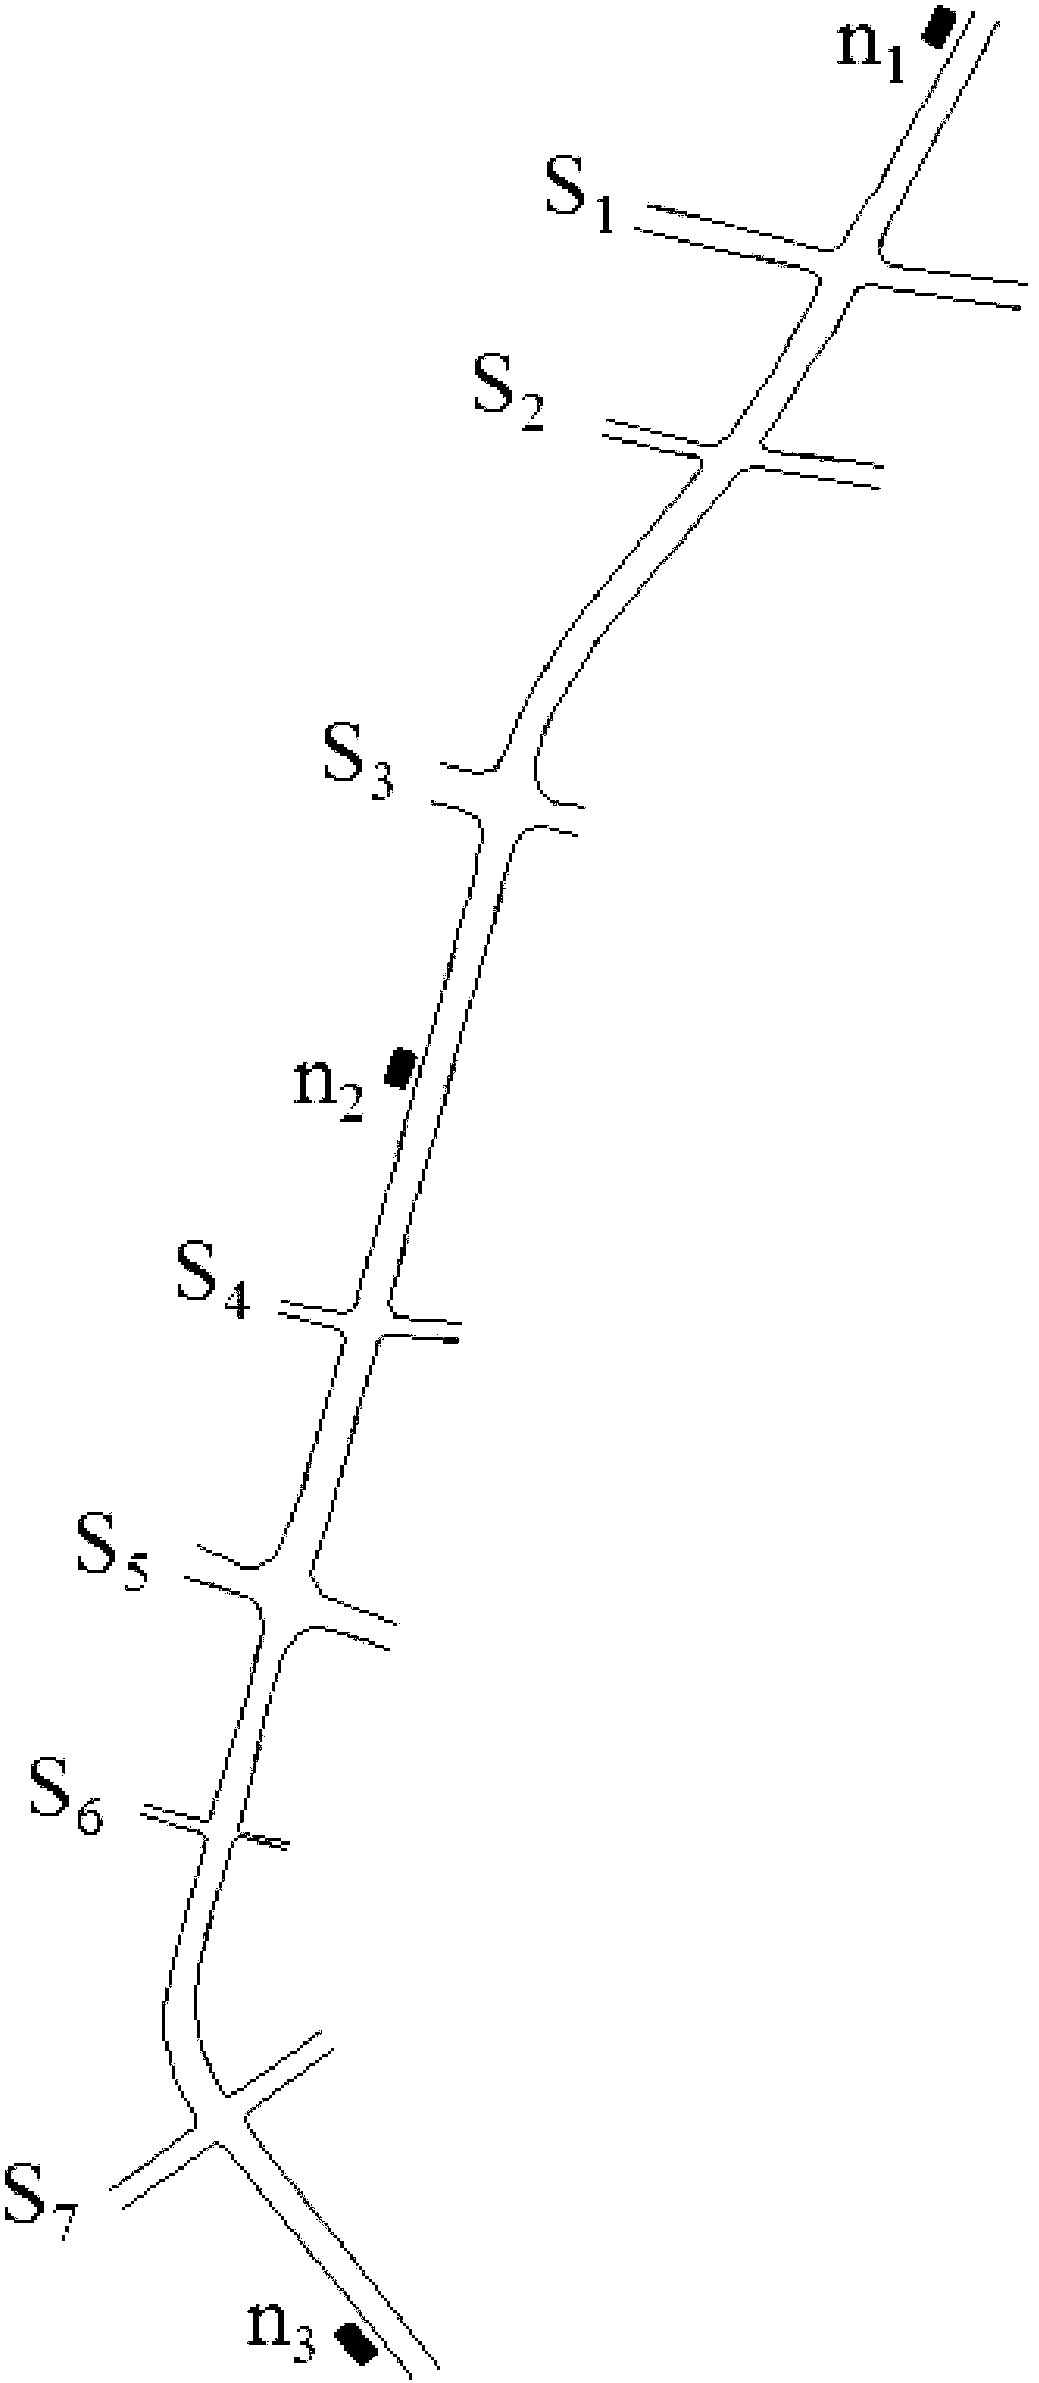 Method for setting inter-station unidirectional sectioned green wave signals for long-spacing buses